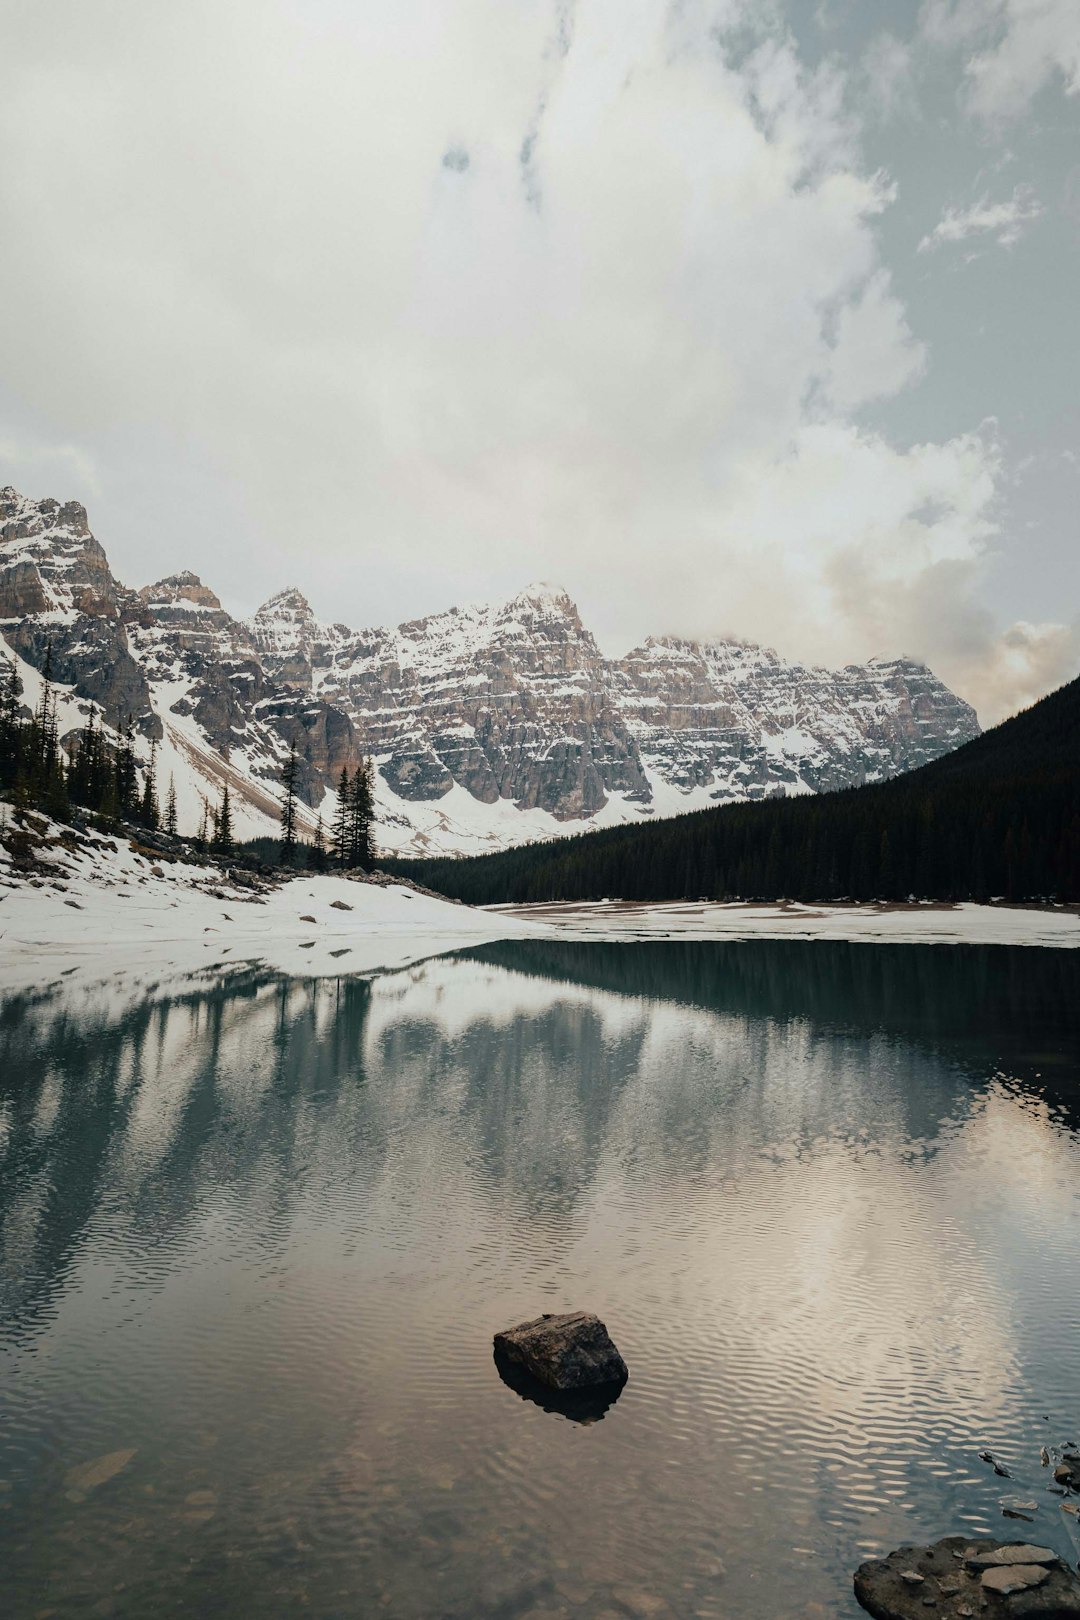 Highland photo spot Moraine Lake Canmore